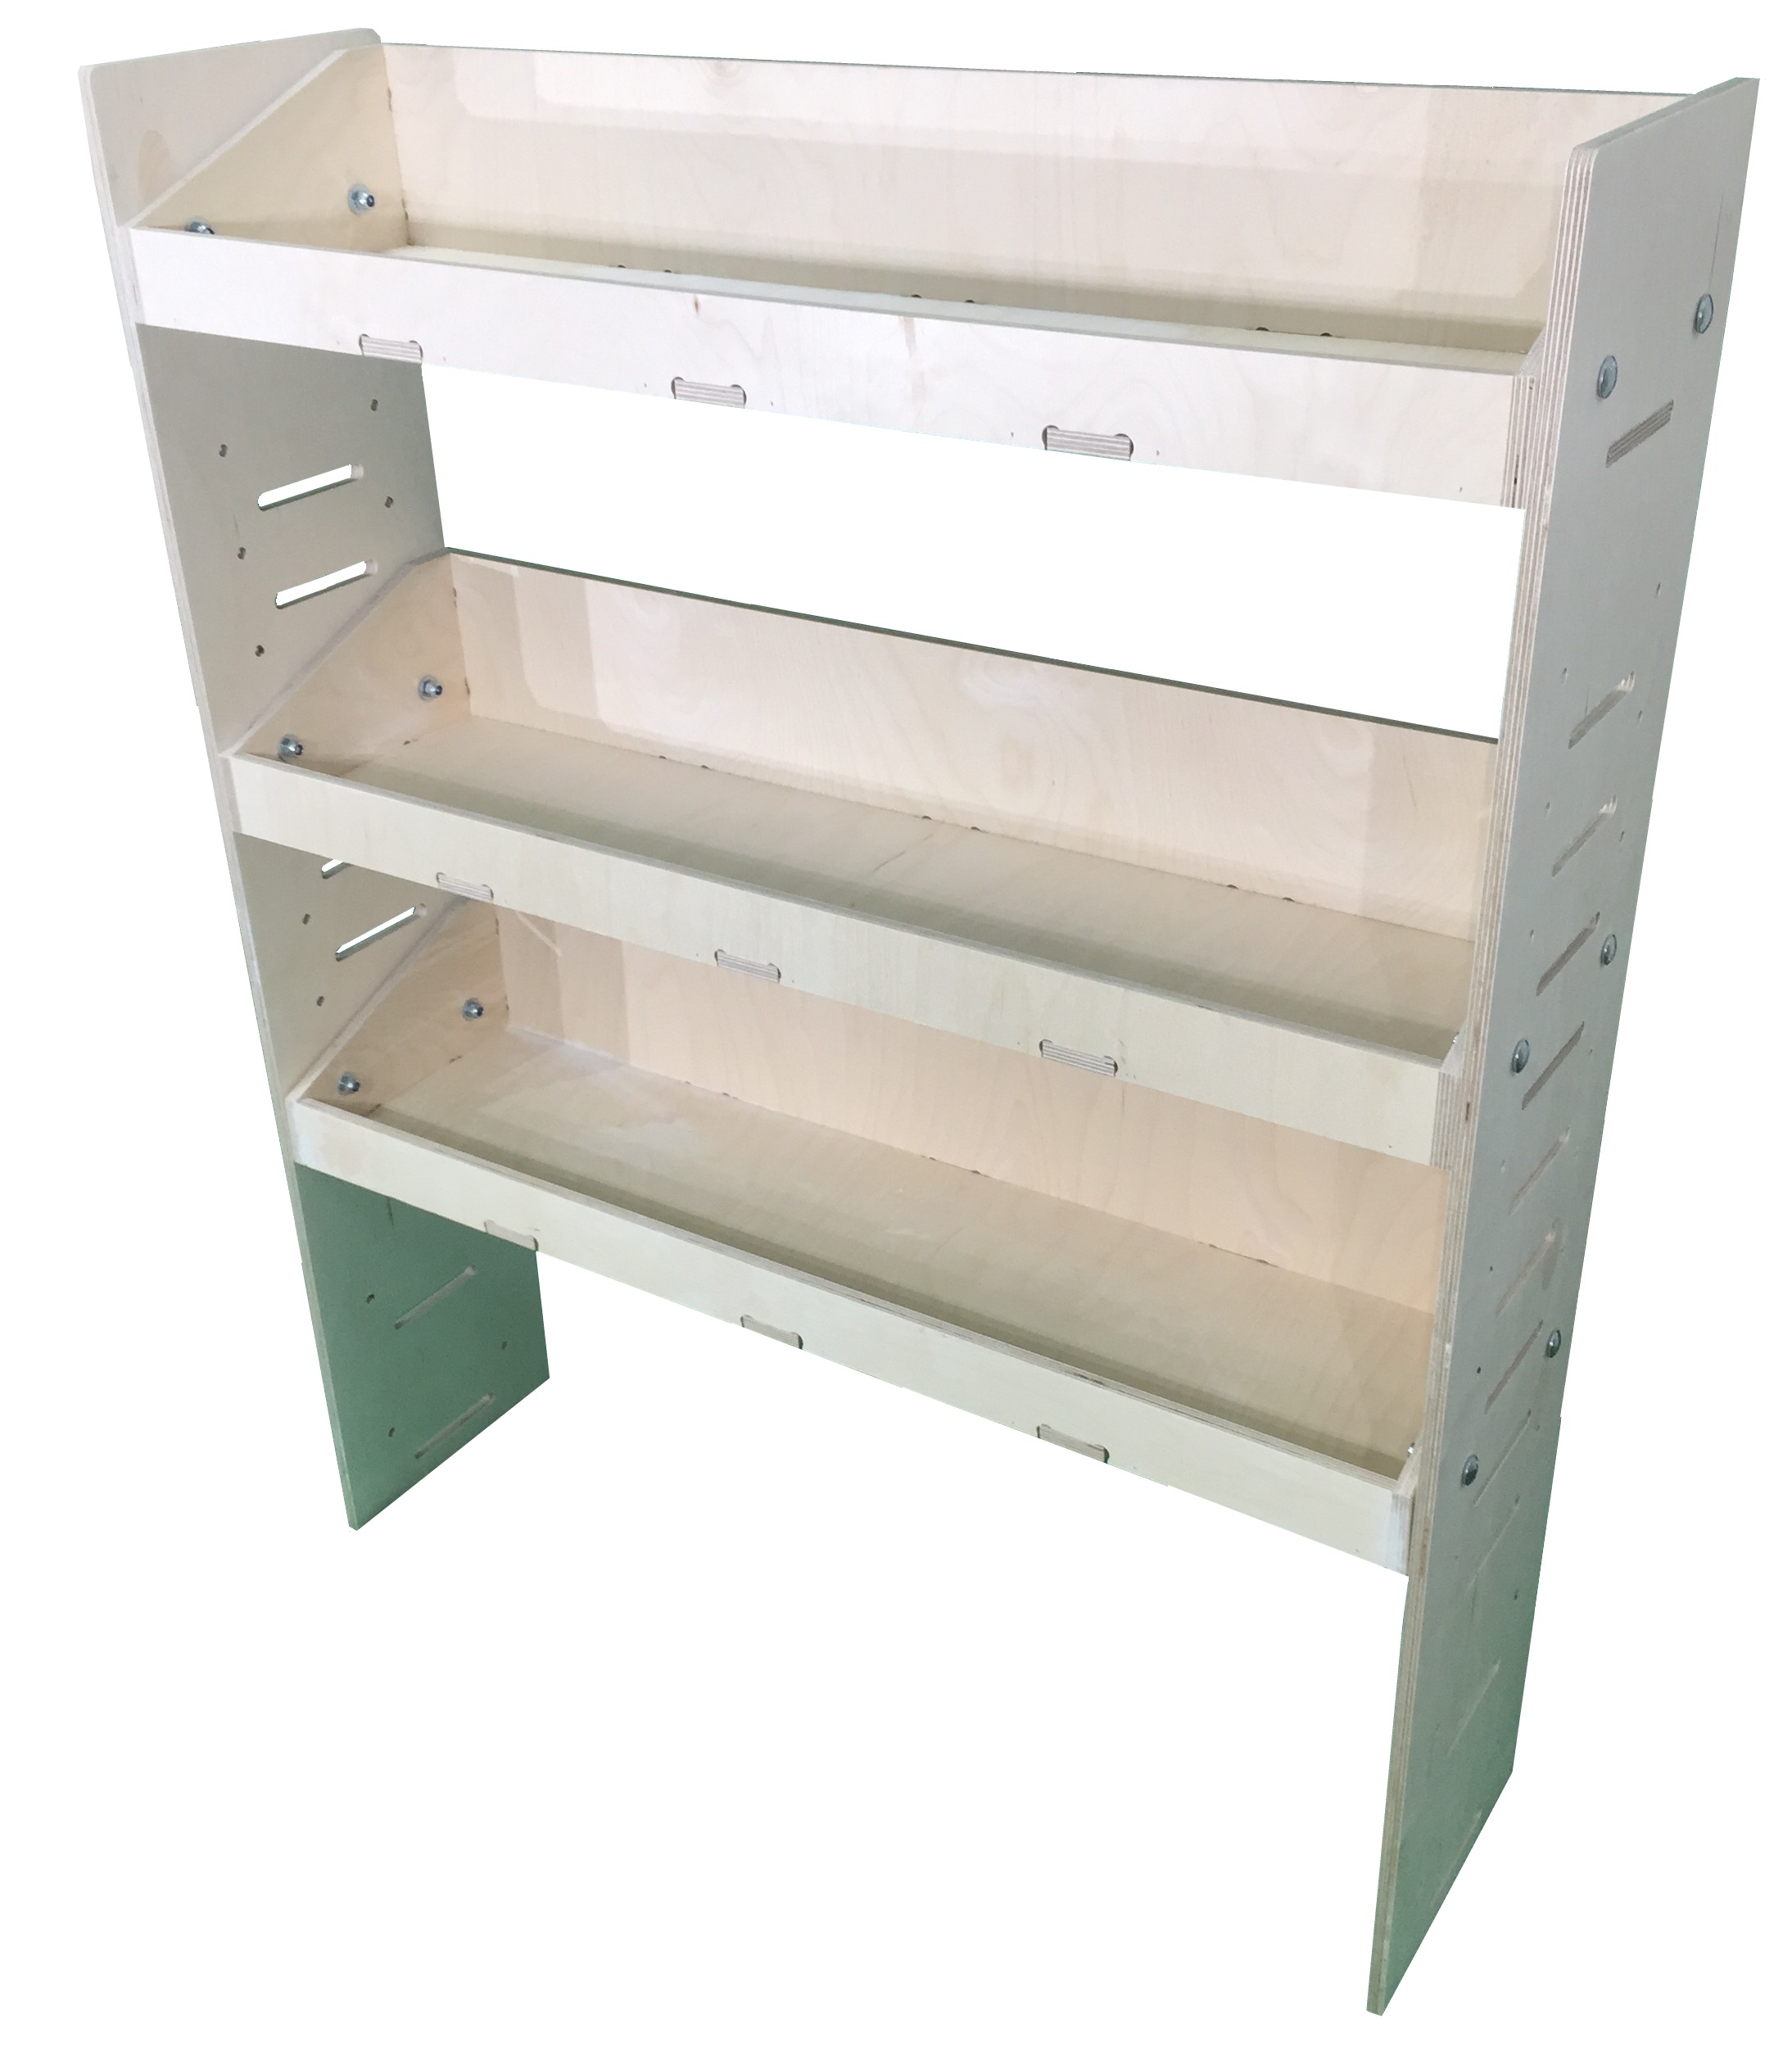 Van Plywood Shelving and Racking Storage System 1237mm(H) x 1000mm(W) x 269mm(D) - BVR1210263